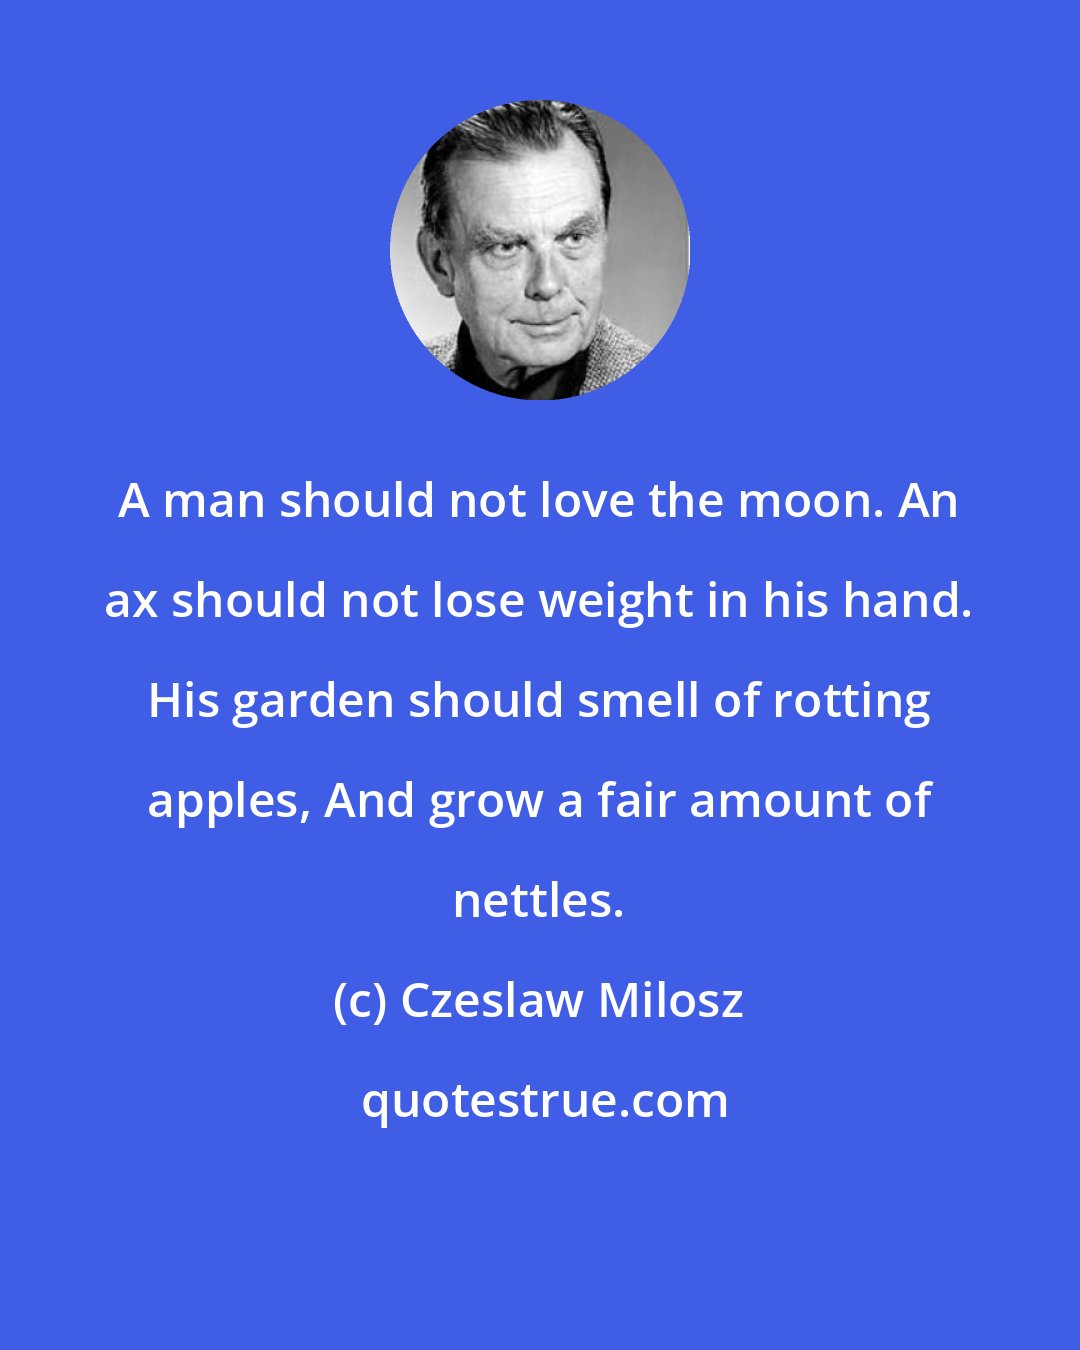 Czeslaw Milosz: A man should not love the moon. An ax should not lose weight in his hand. His garden should smell of rotting apples, And grow a fair amount of nettles.